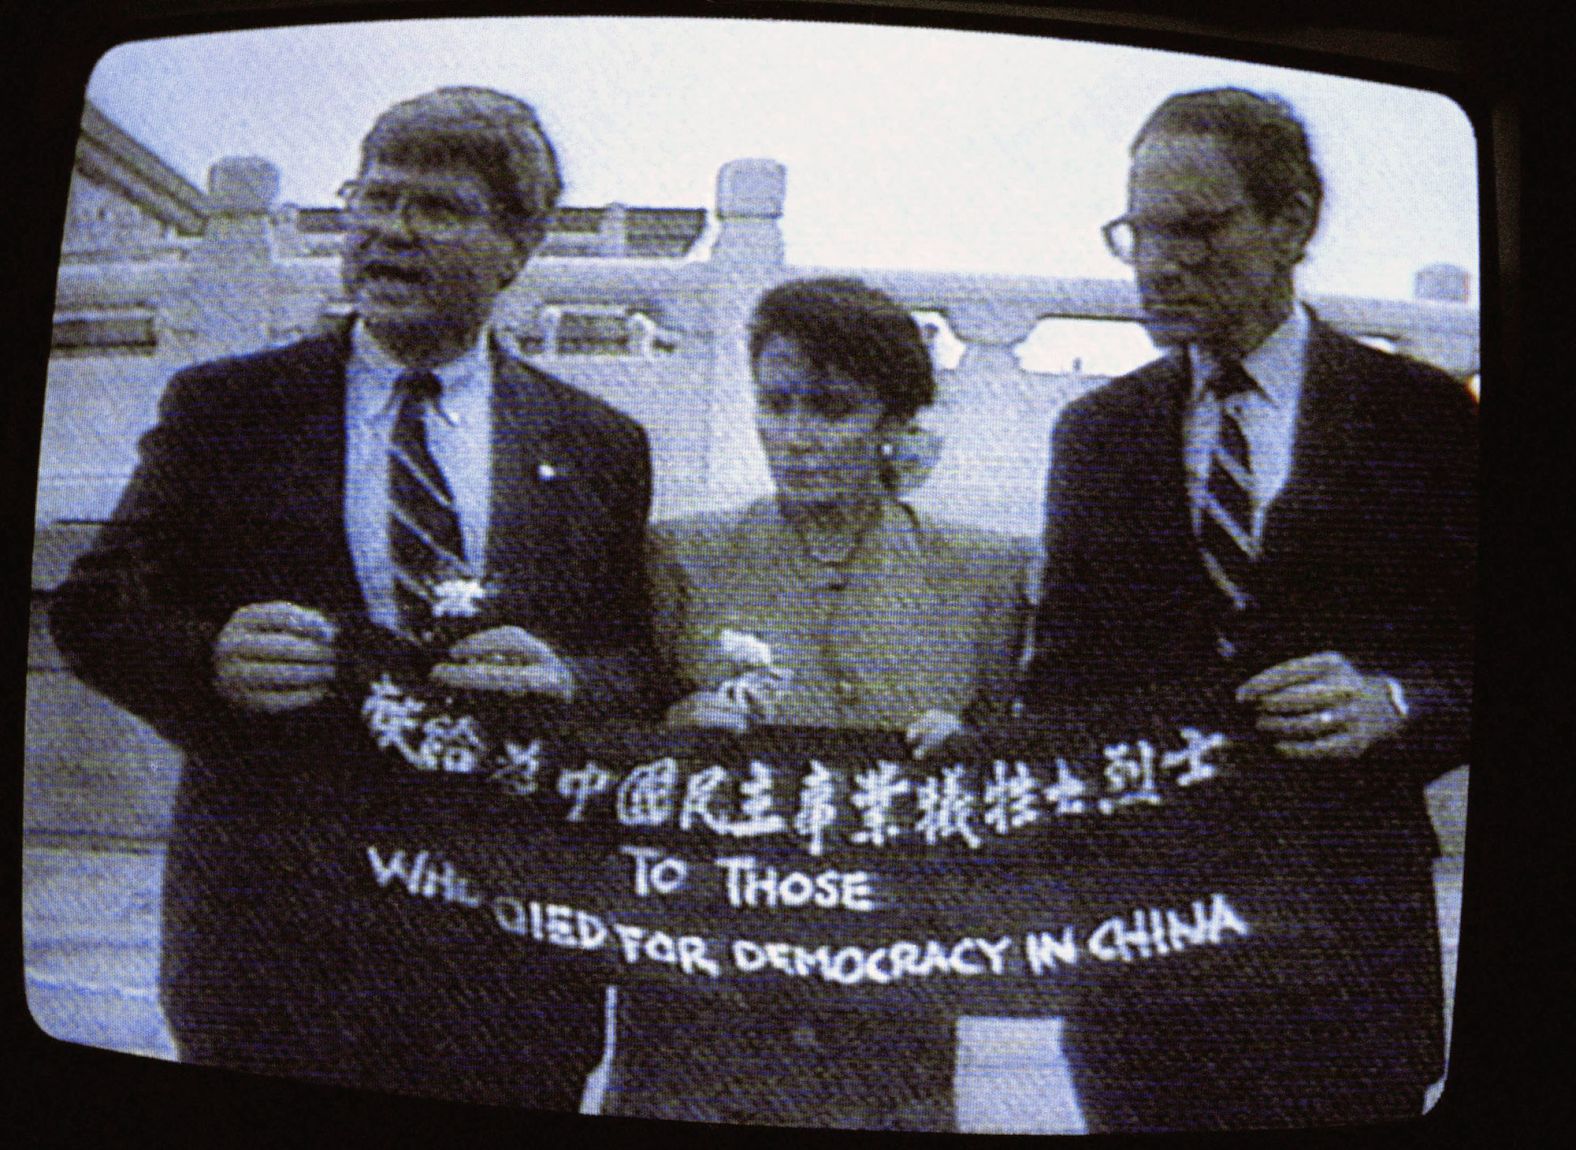 Pelosi and fellow US Reps. Ben Jones, left, and John Miller unfold a banner during a trip to Beijing in 1991. The banner says, "To those who died for democracy in China," honoring the victims of the crackdown on Tiananmen Square protesters in 1989. Throughout her career in Congress, Pelosi has a long history of <a href="index.php?page=&url=https%3A%2F%2Fwww.cnn.com%2F2022%2F08%2F02%2Fpolitics%2Fgallery%2Fpelosi-china-history%2Findex.html" target="_blank">representing the US to Chinese officials</a>, including standing up to Beijing as well as presidents from her own party.